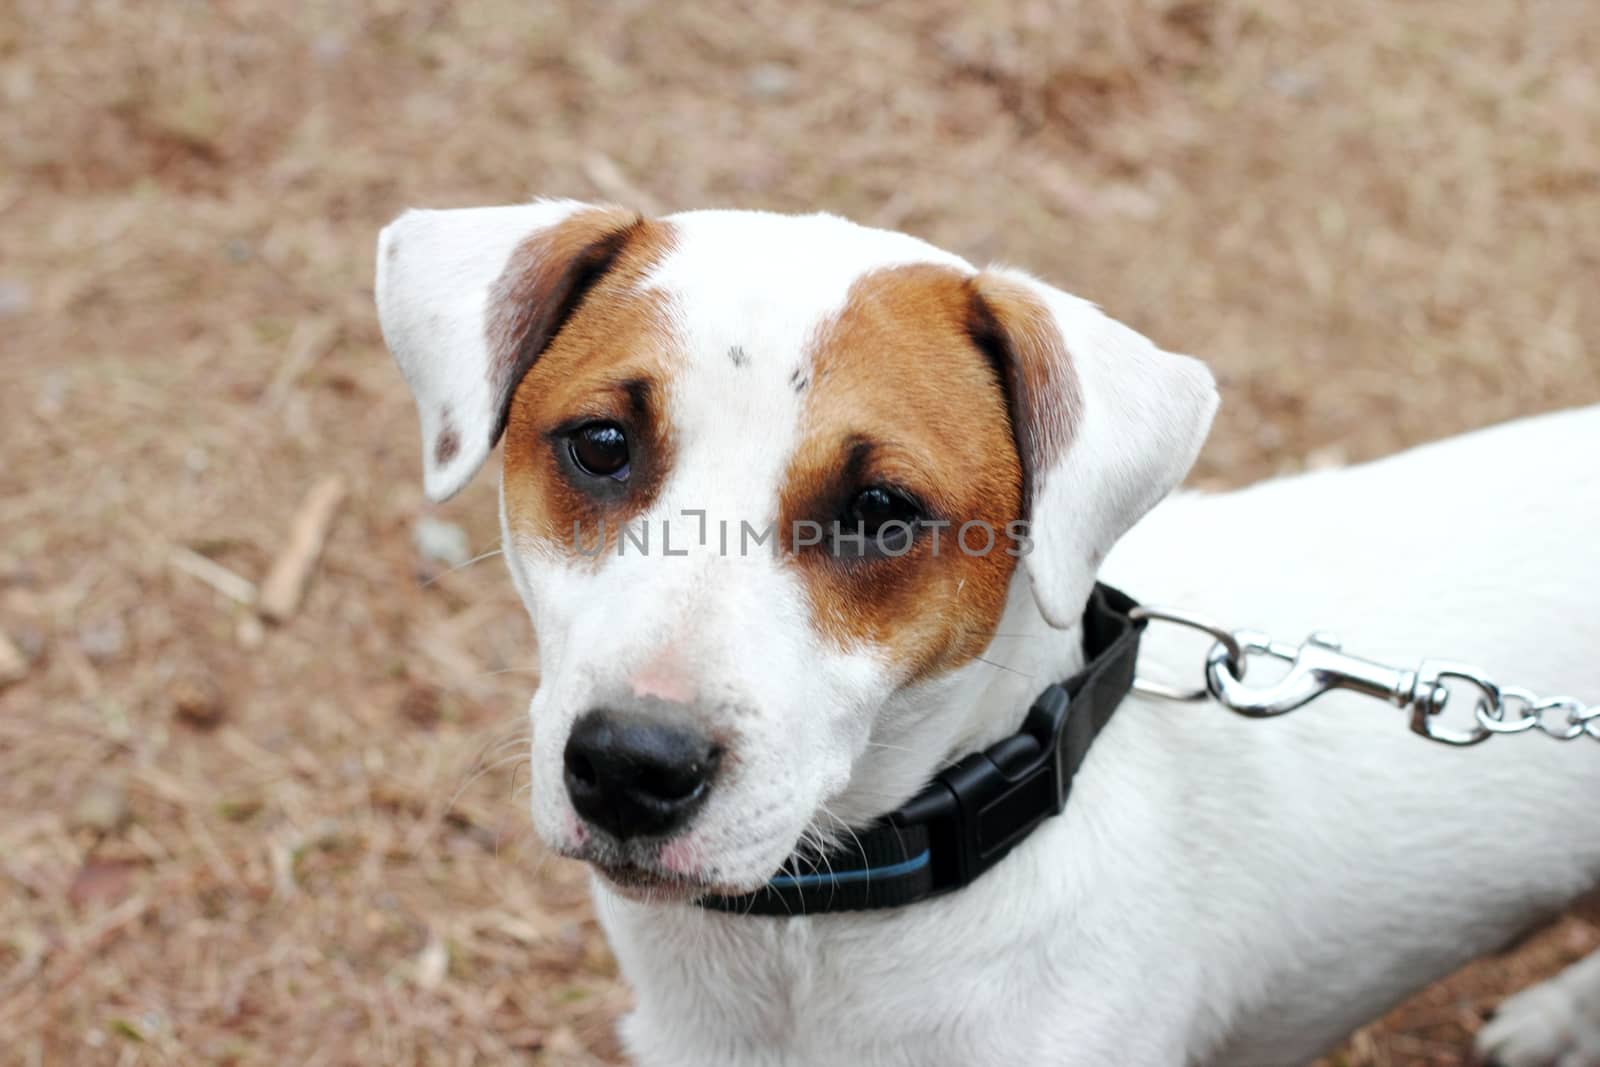 Dog breed Jack Russell terrier on a leash on a background of golden land